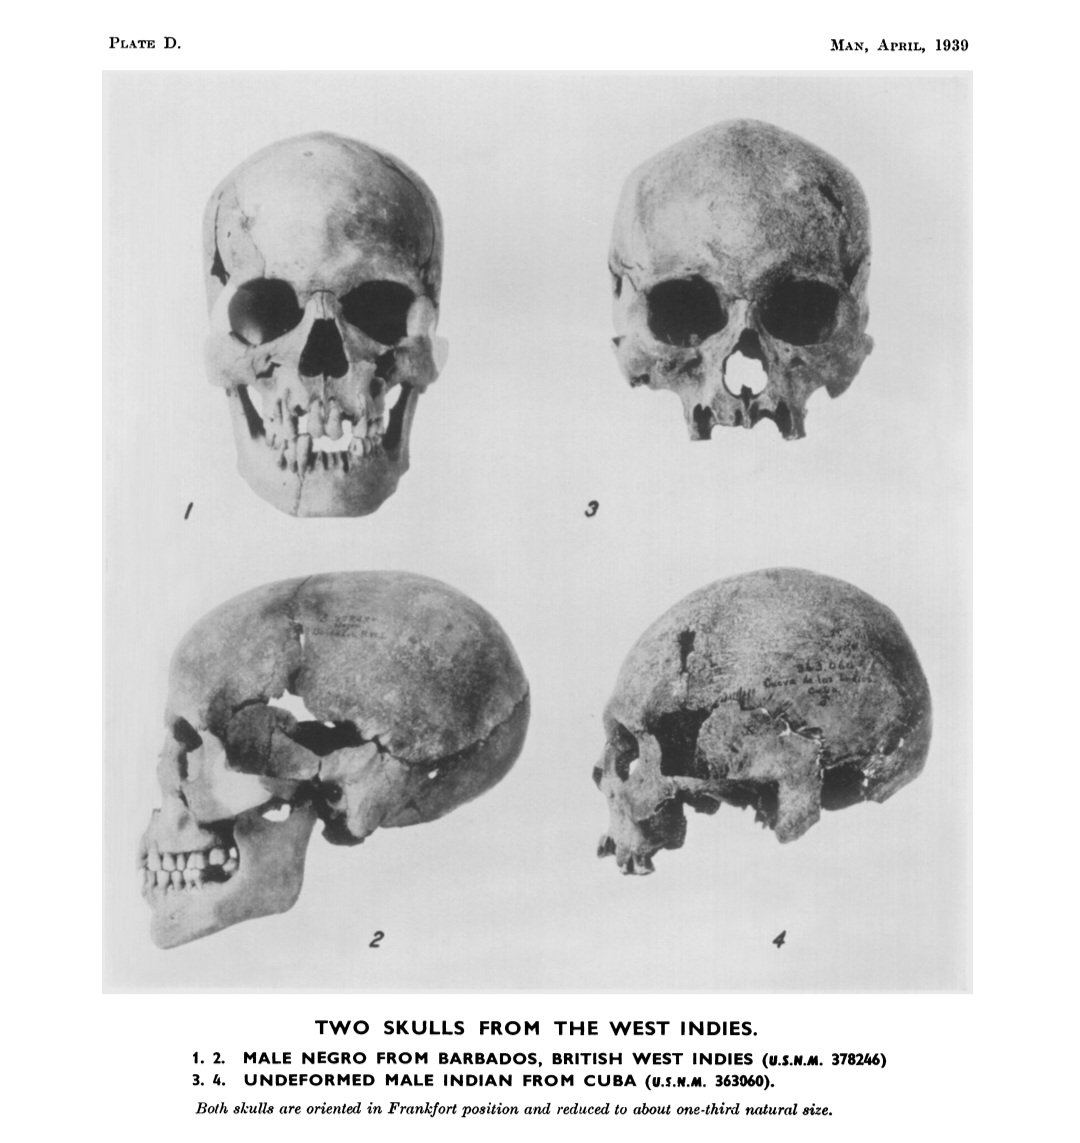 Two Negro male skeletons found in the US Virgin Islands by the Smithsonian team dating back to 1250 AD in PRE COLUMBIAN TIMES!

#BlackAmericans #BlackIndians #NativeAmerican #BlackNativeAmericans #IndigenousPeoples #FBA #westindian #WestIndies
 nytimes.com/1975/12/04/arc….